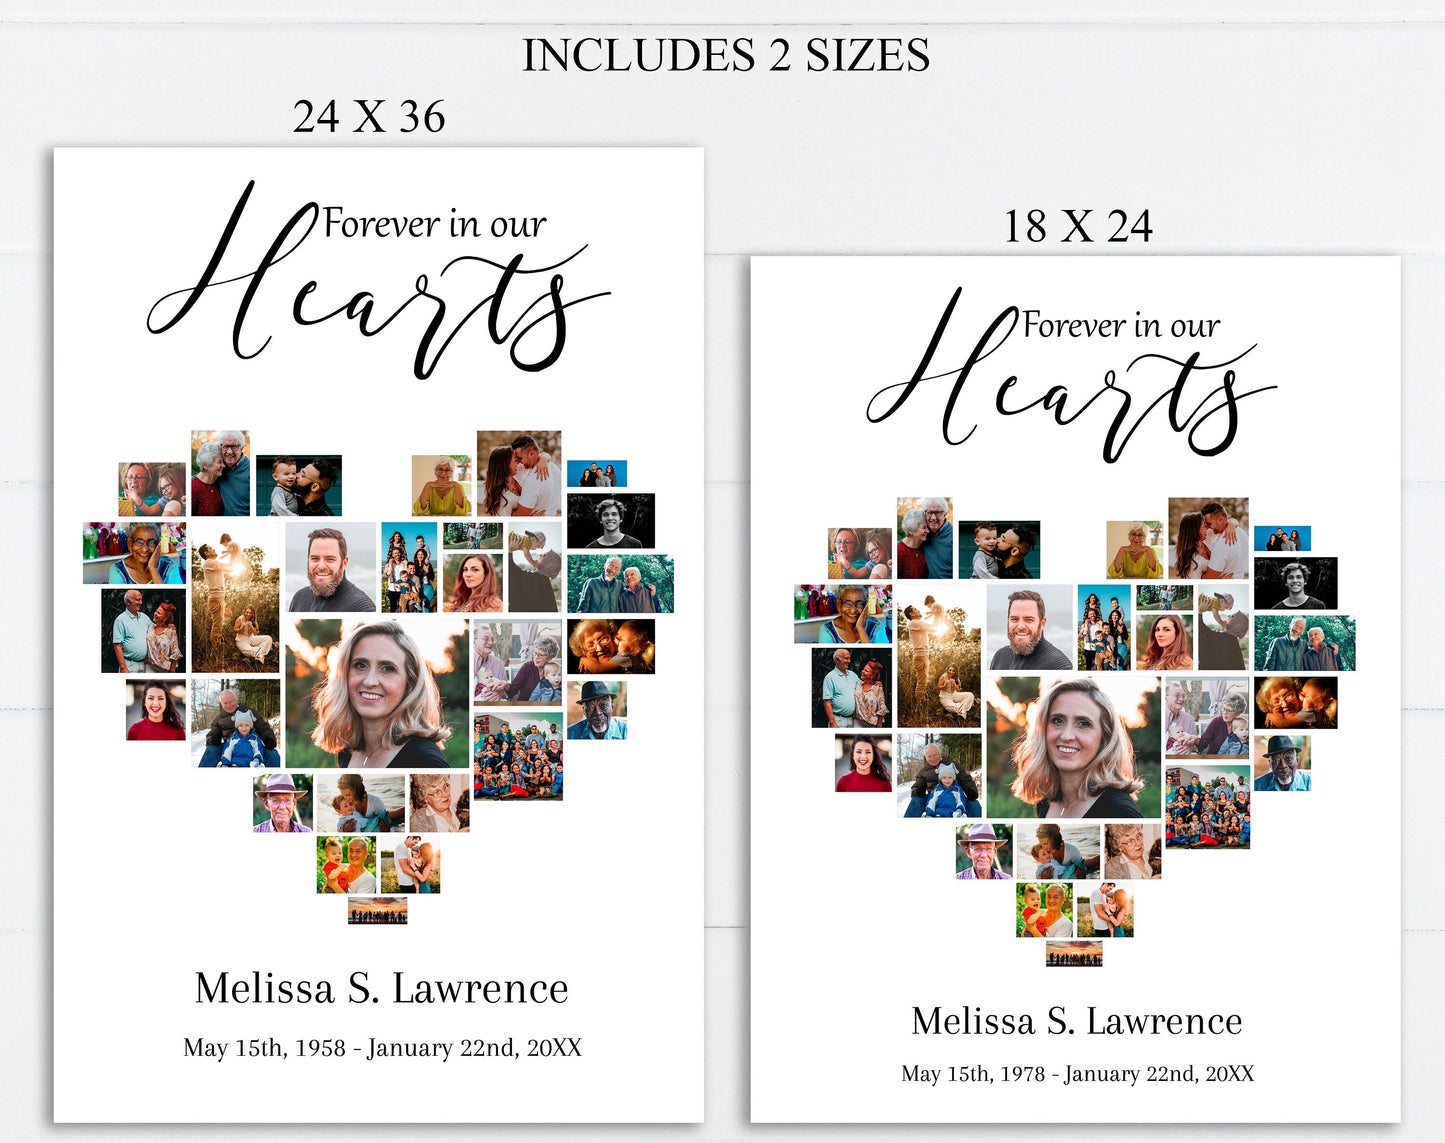 Heart Collage Funeral Memory Board Template - Set of 3